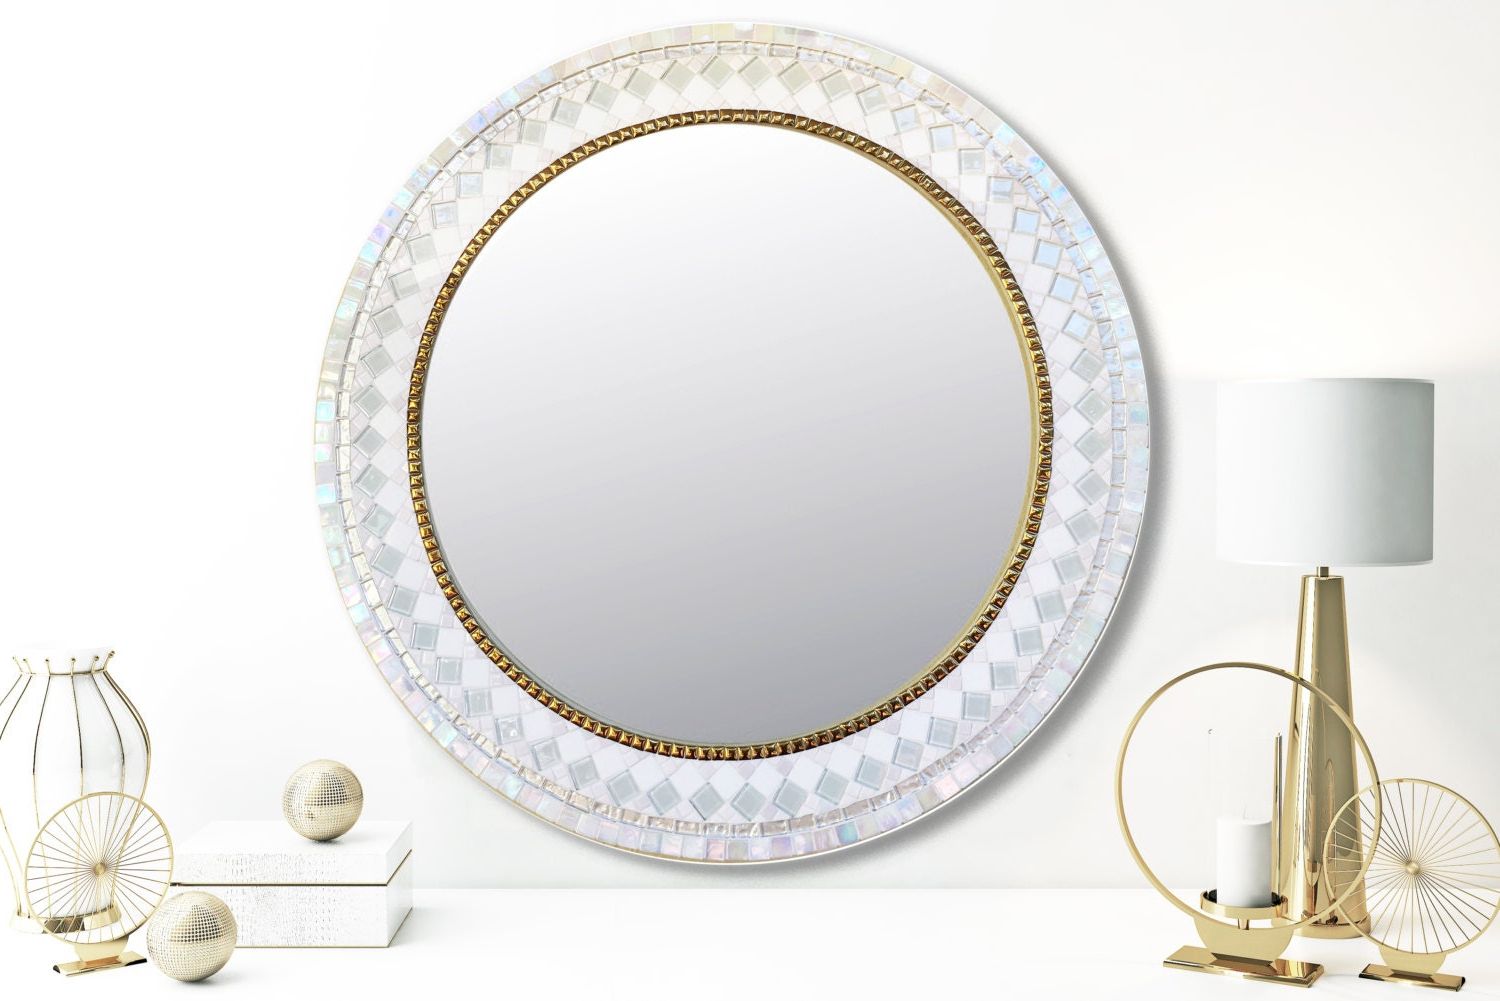 Mosaic Mirror Round Wall Mirror White And Gold Mosaic Pertaining To Well Known Gold Black Rounded Edge Wall Mirrors (View 2 of 15)